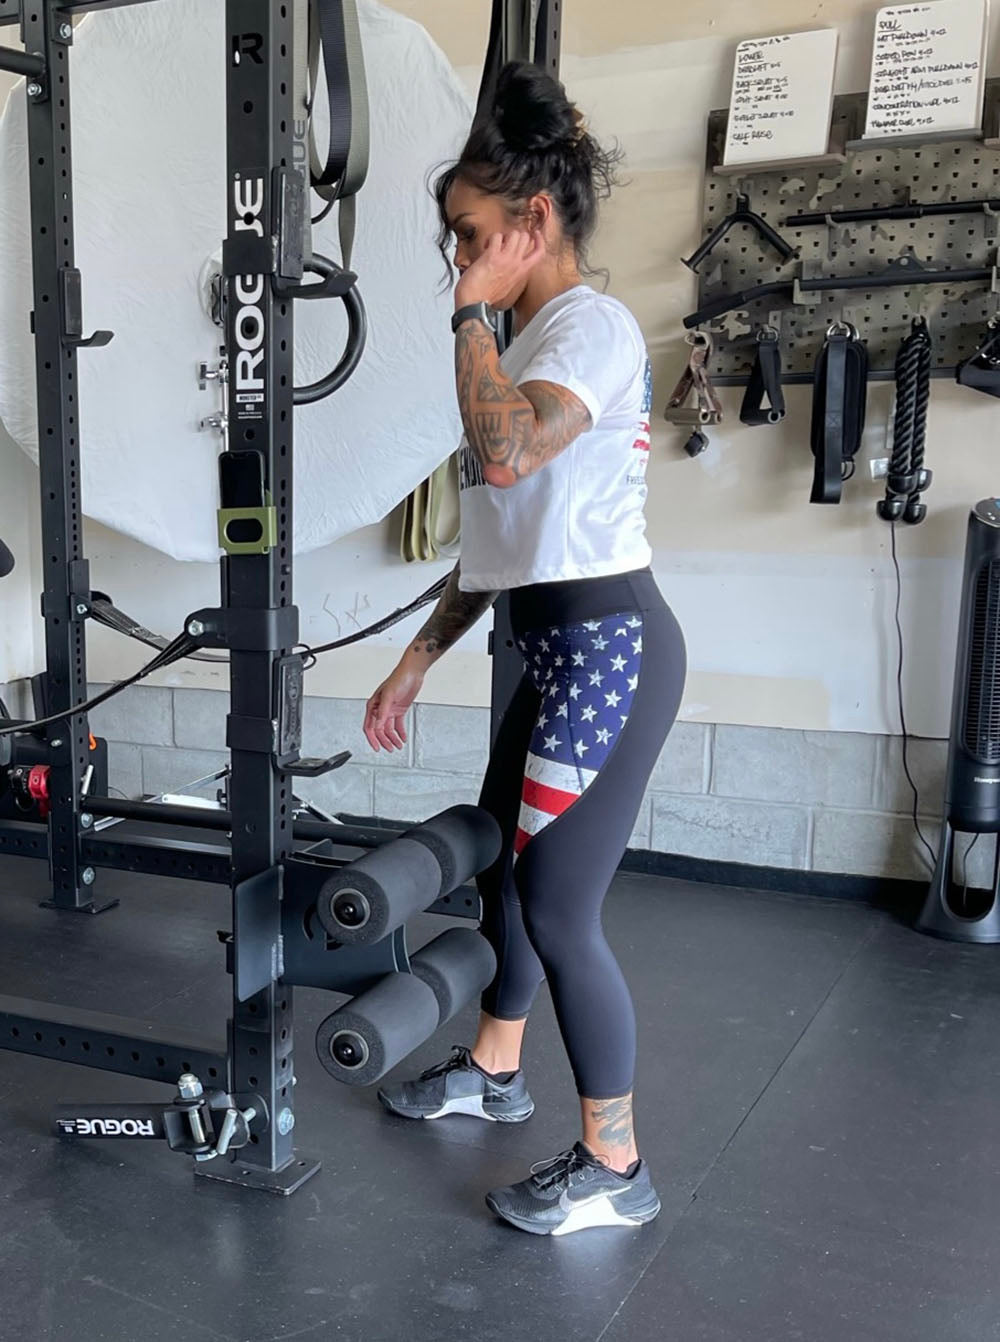 This Rack Mounted Glute Ham Developer is less bulky and lower priced than conventional GHDs. Perfect for glute workouts, ab workouts, and hamstring workouts. This image presents the Rack Mounted Glute Ham Developer being attached on a power rack in a garage gym.